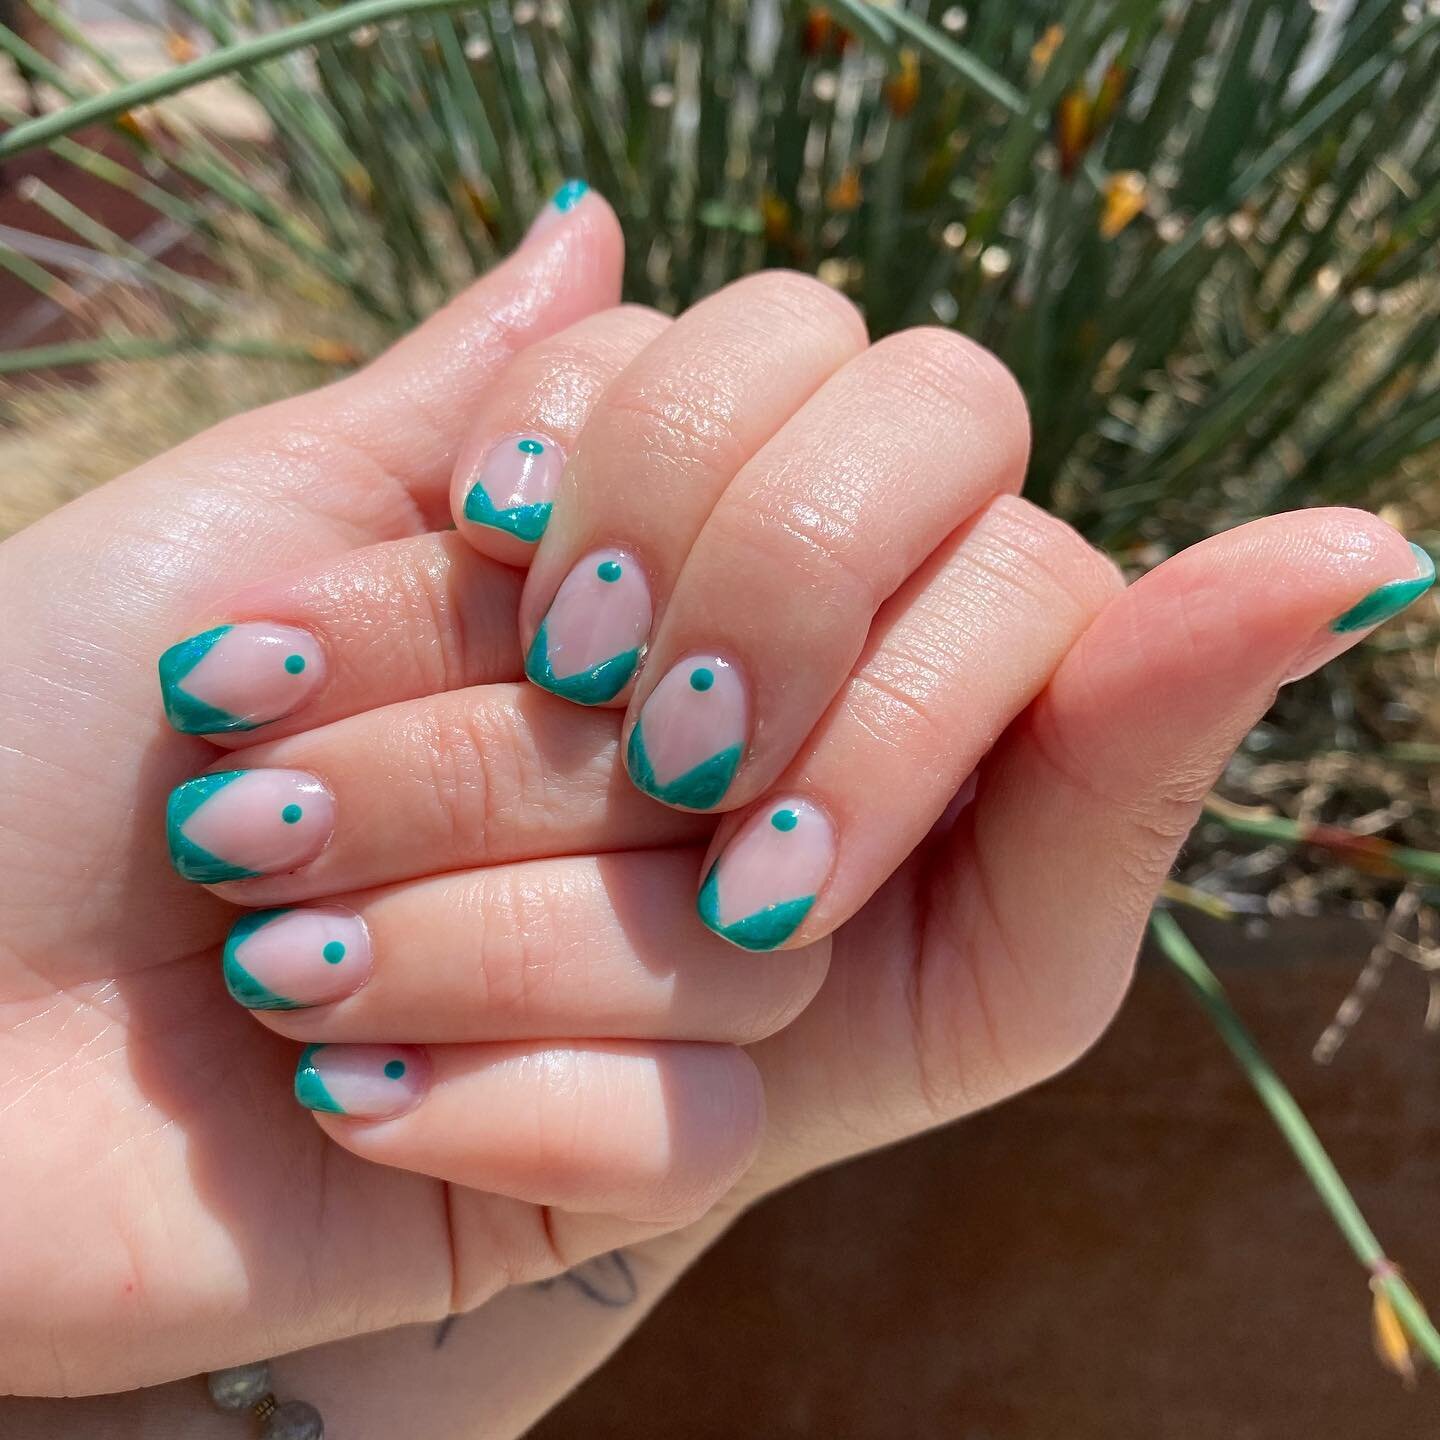 Deco and dots featuring @the_gelbottle_inc Marshmallow and Peacock 🦚❇️ #thegelbottlemarshmallow #thegelbottlepeacock #advancednailart